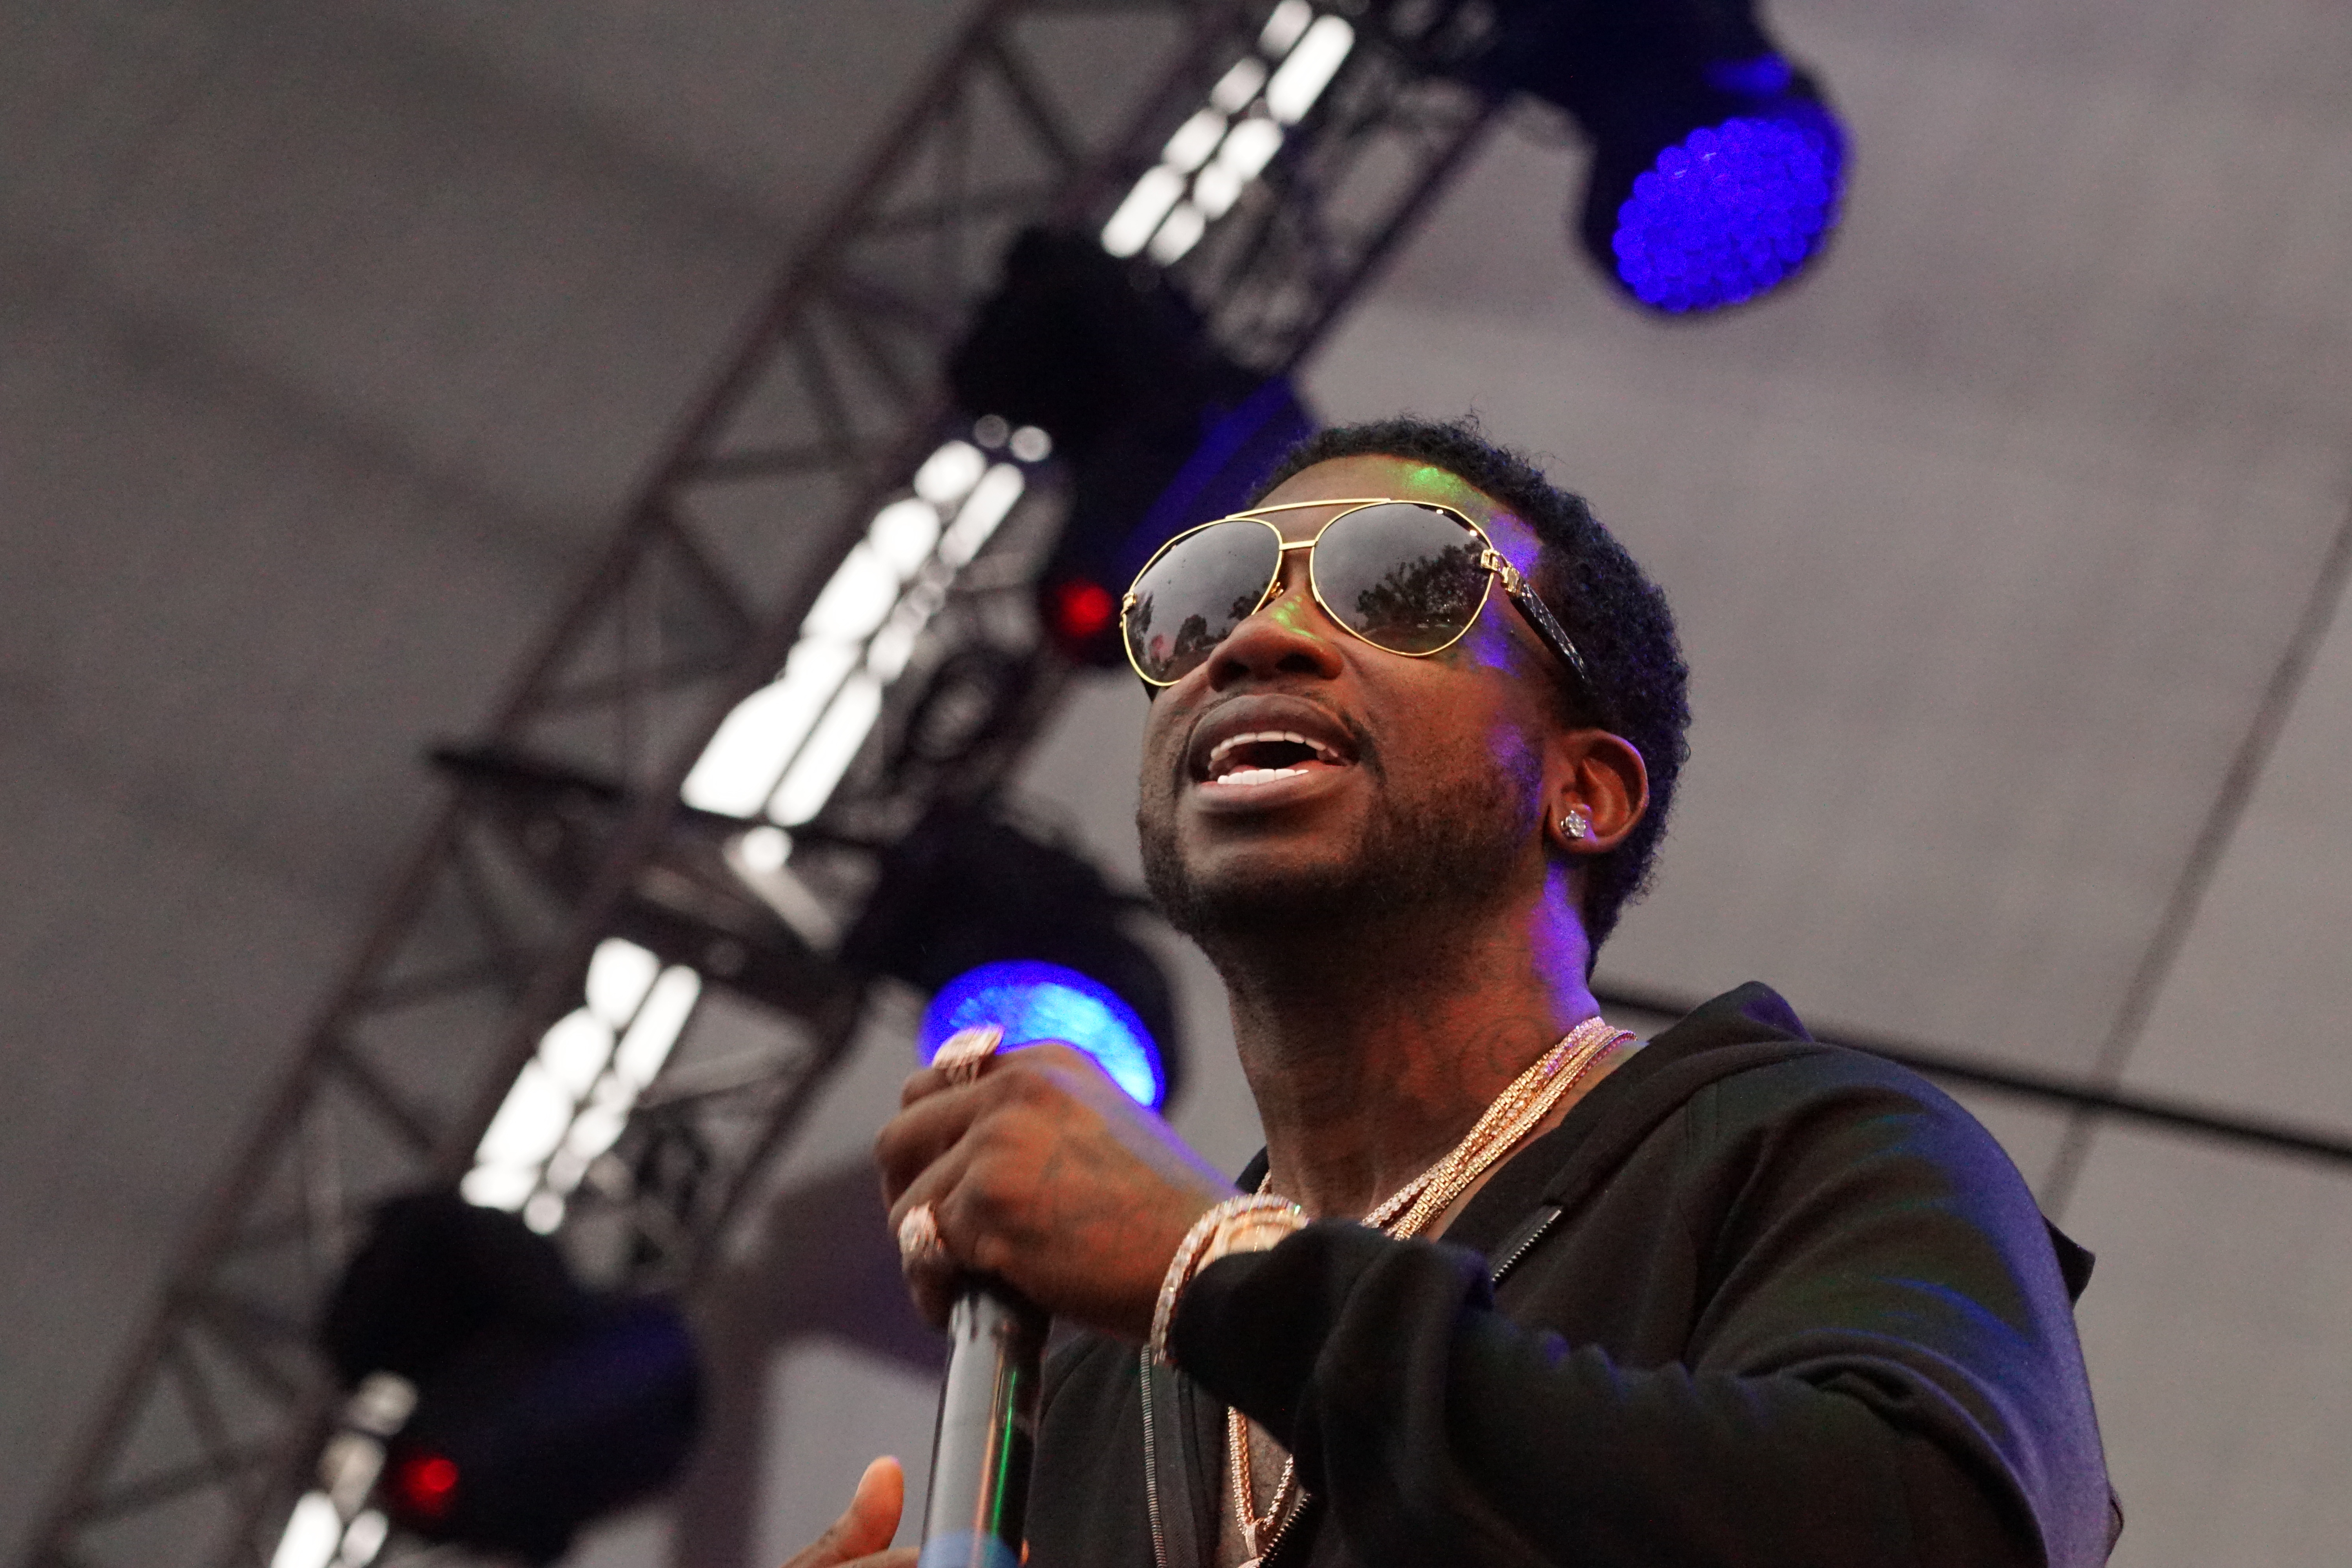 Gucci Mane arrived to the Beach Goth stage Sunday afternoon, after 2 years since his last performance in Santa Ana.